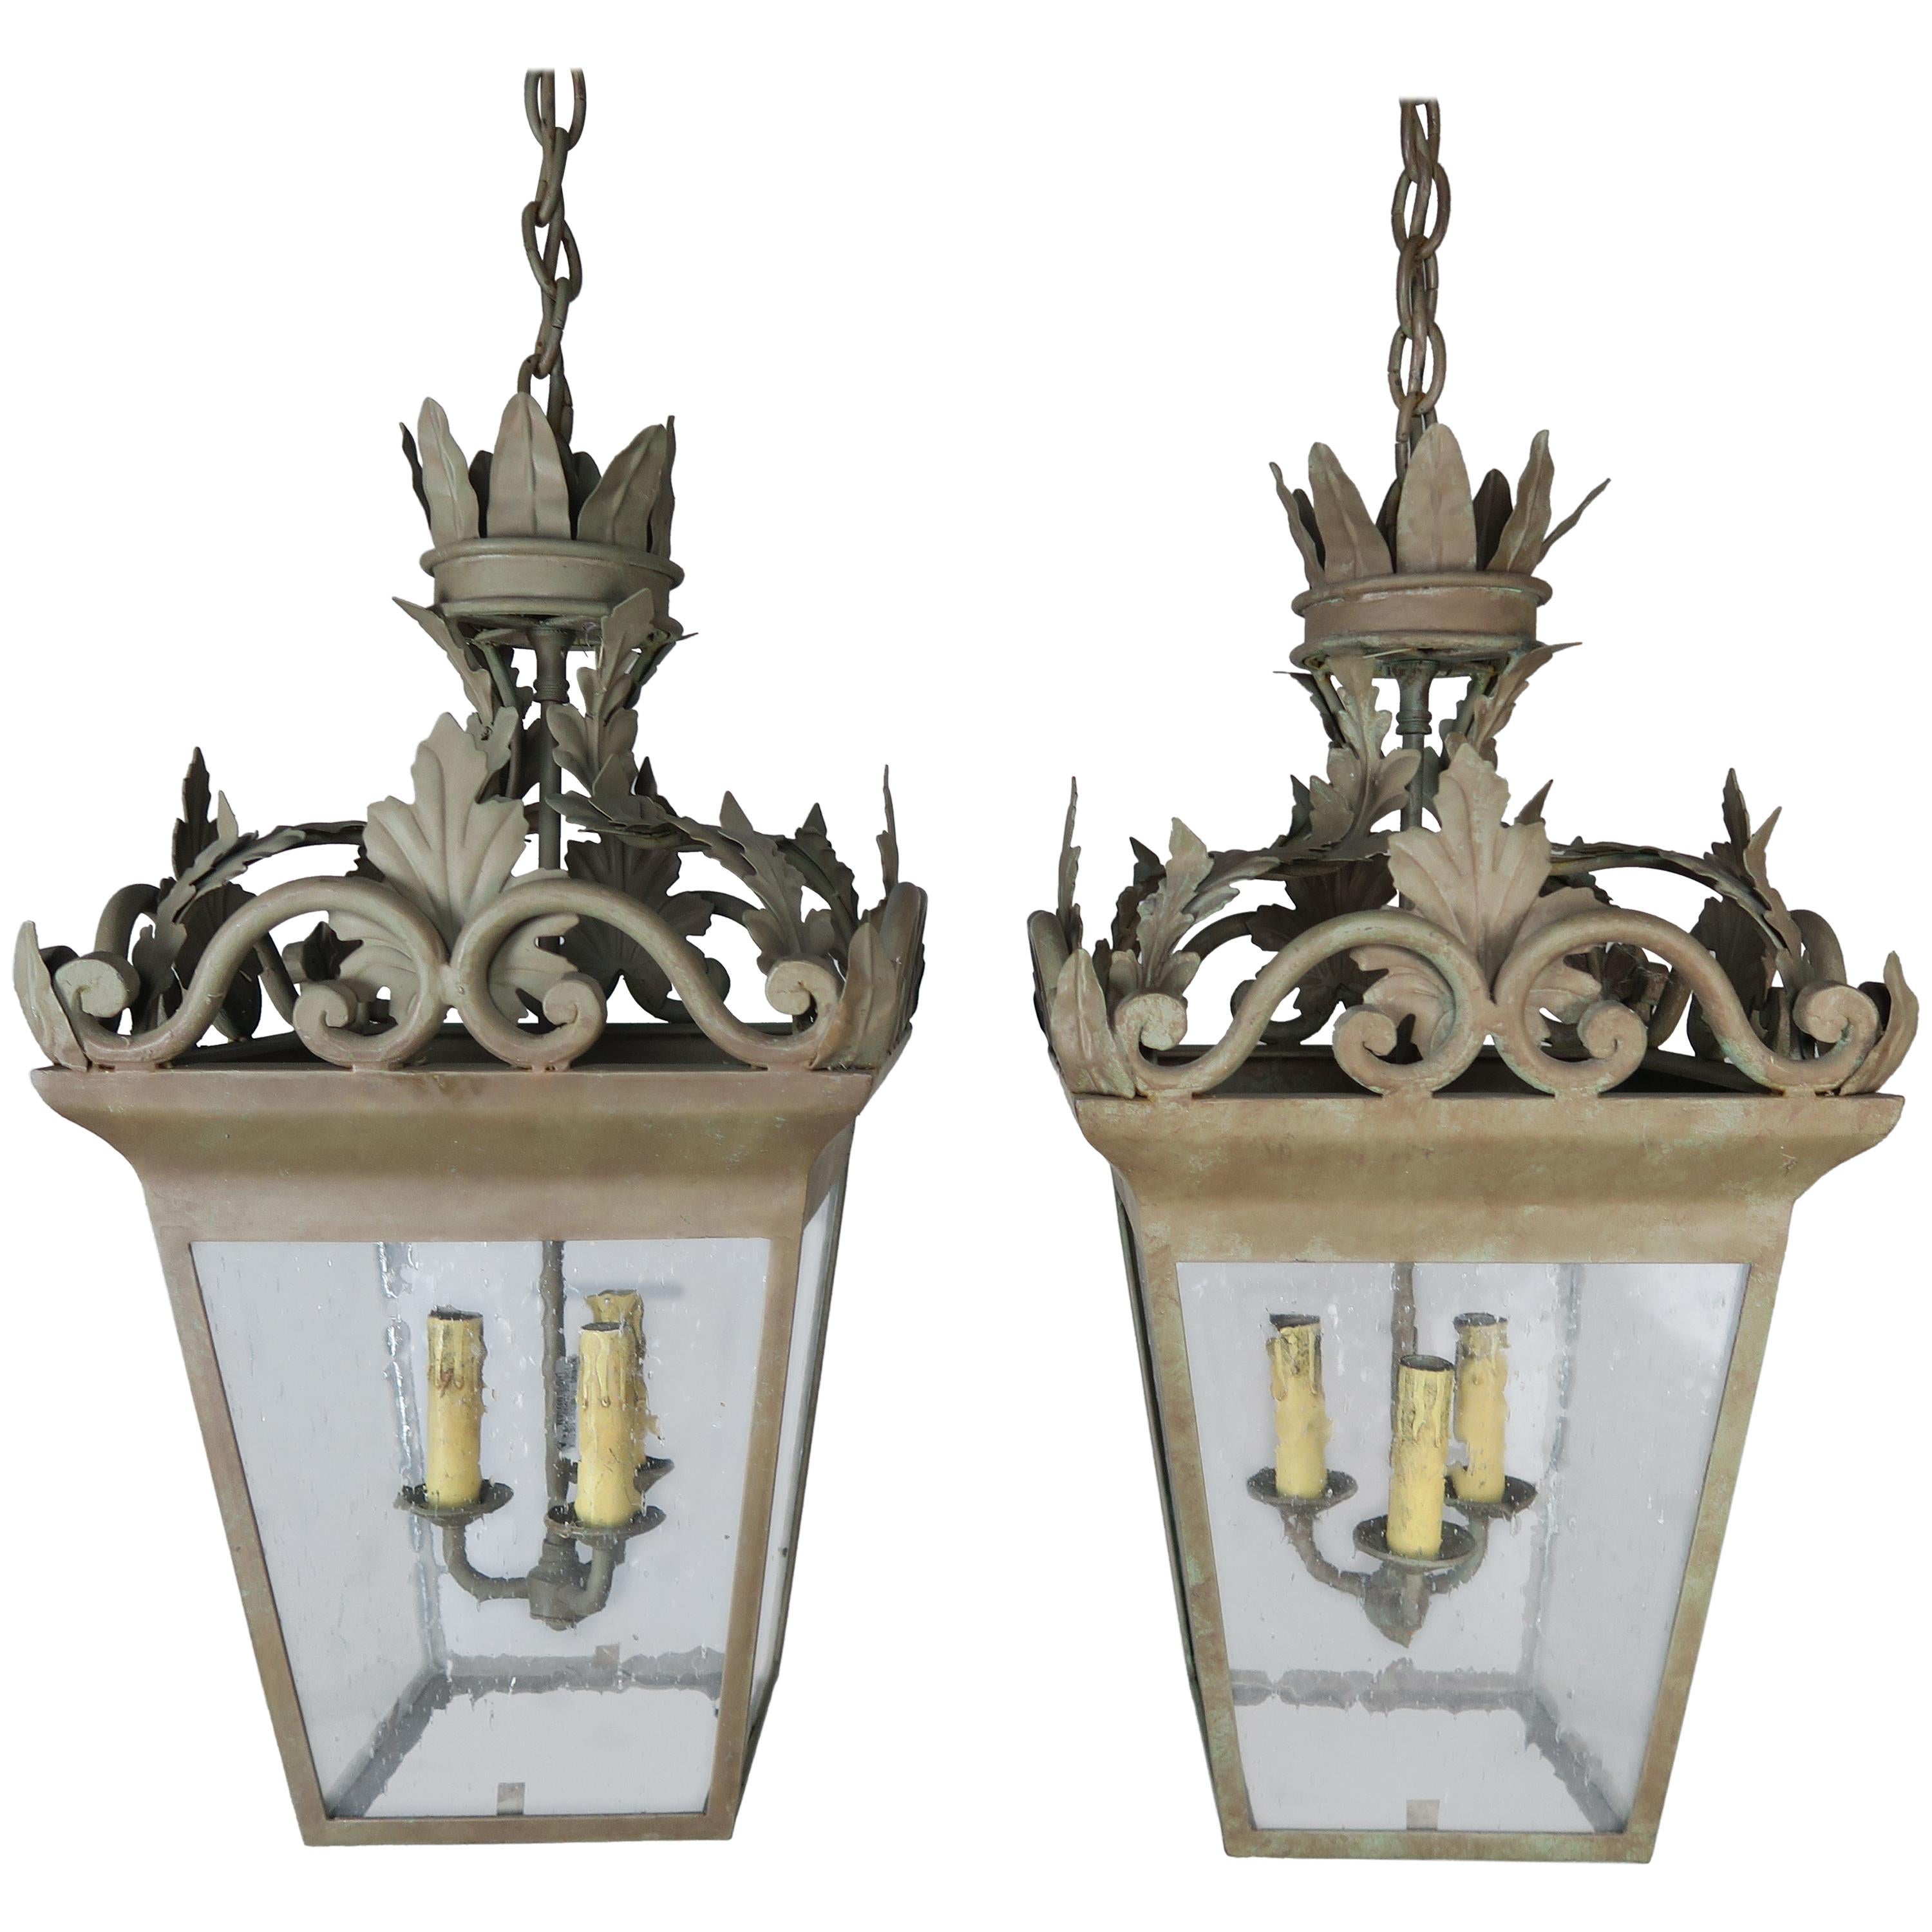 Spanish Hand-Wrought Iron Lanterns with Pitted Glass, Pair